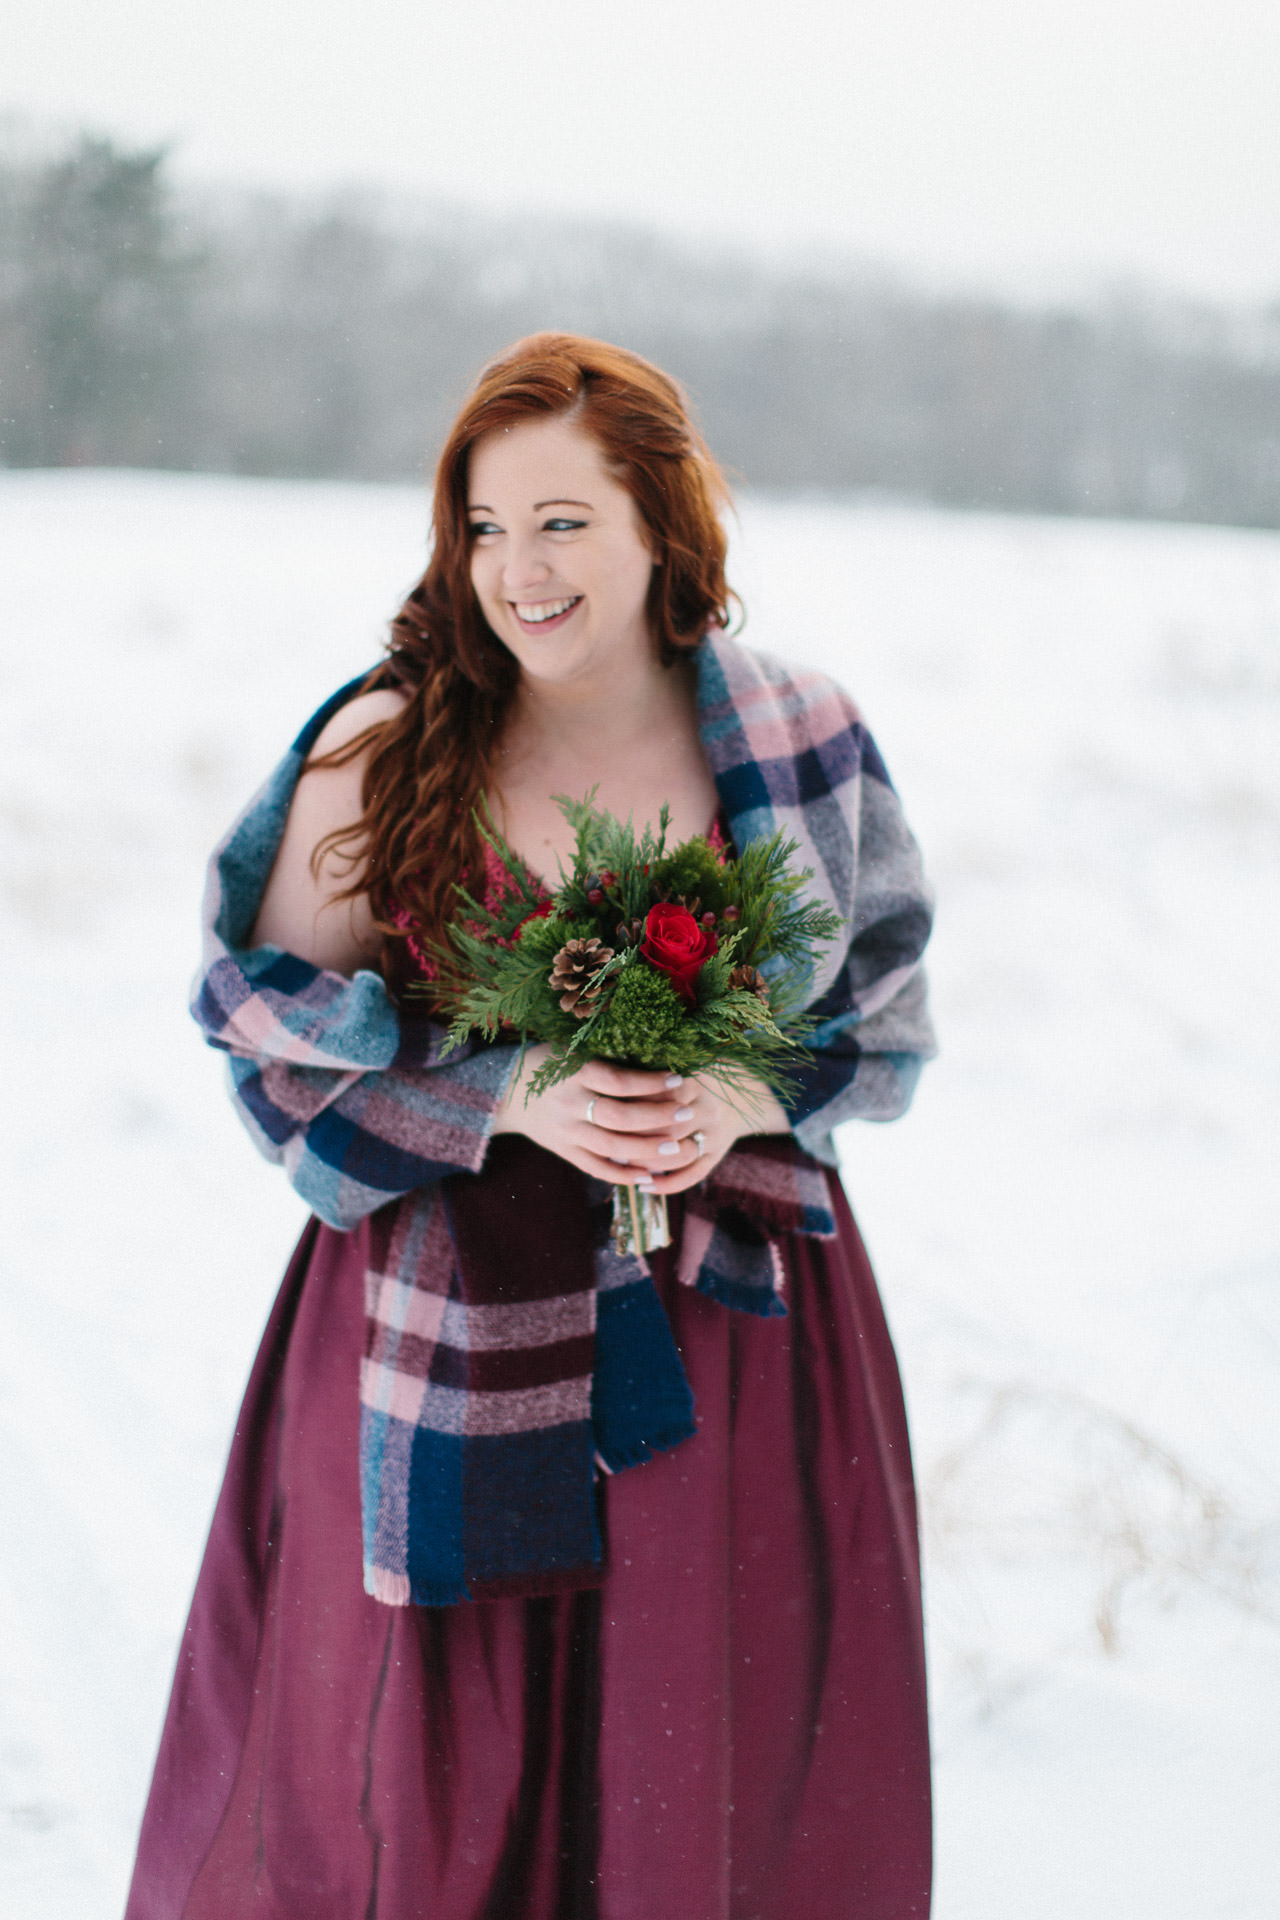 Bride in red wedding gown holding bouquet and smiling